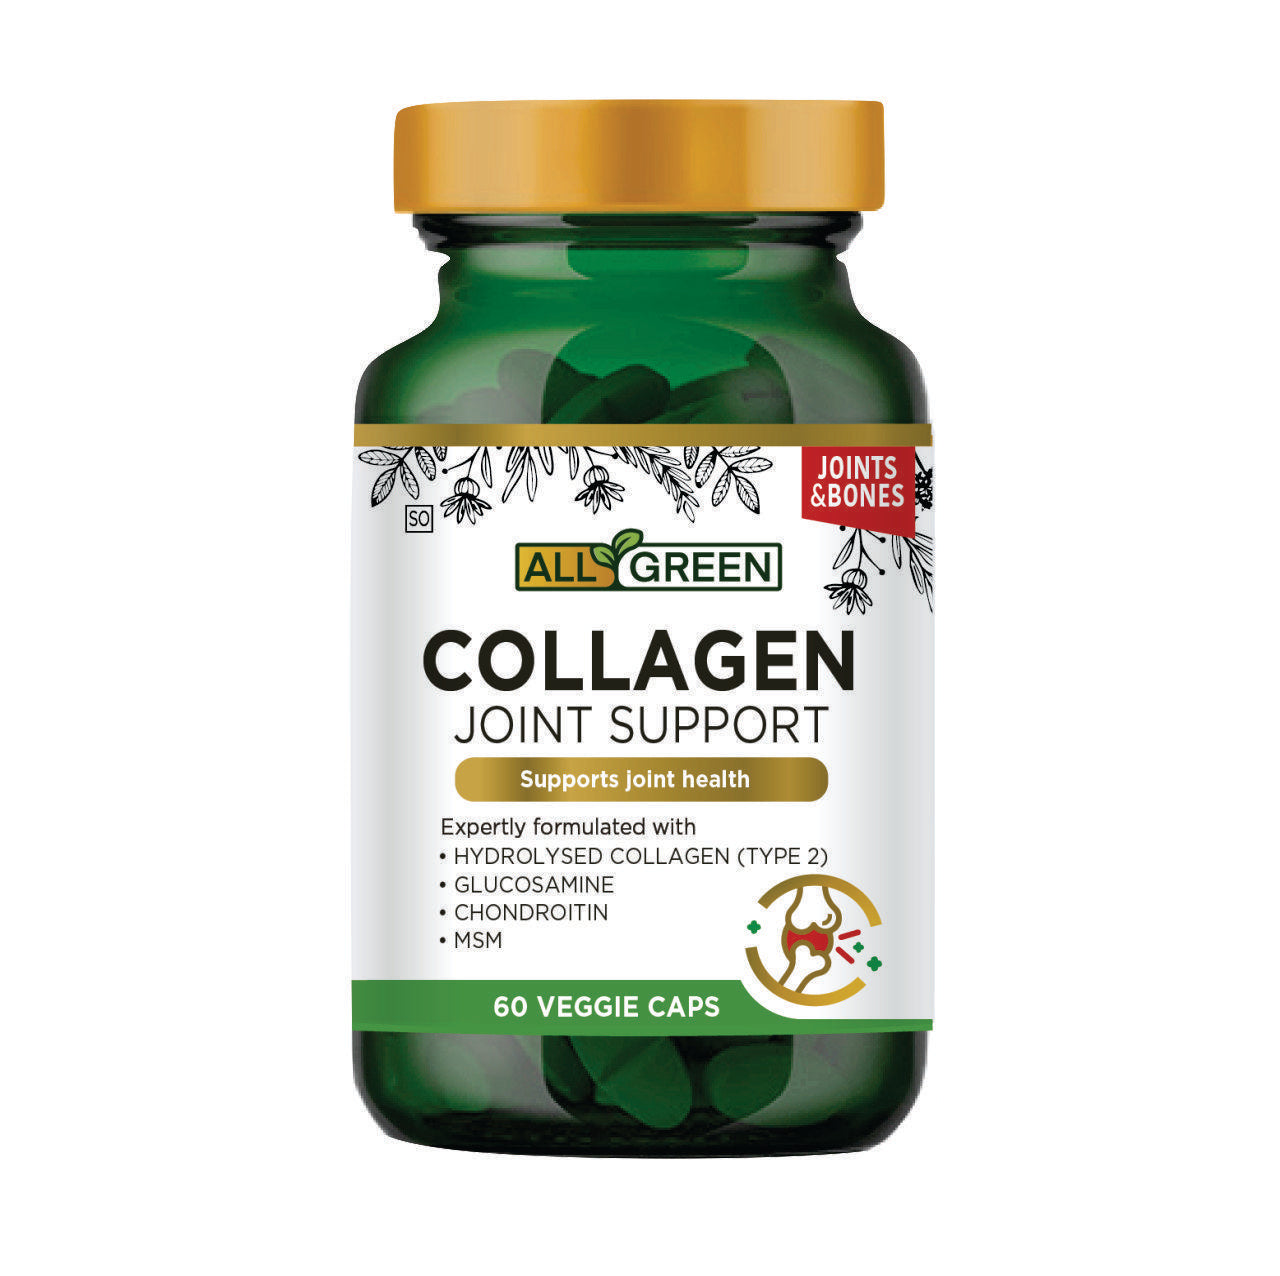 All Green - Collagen Joint Support